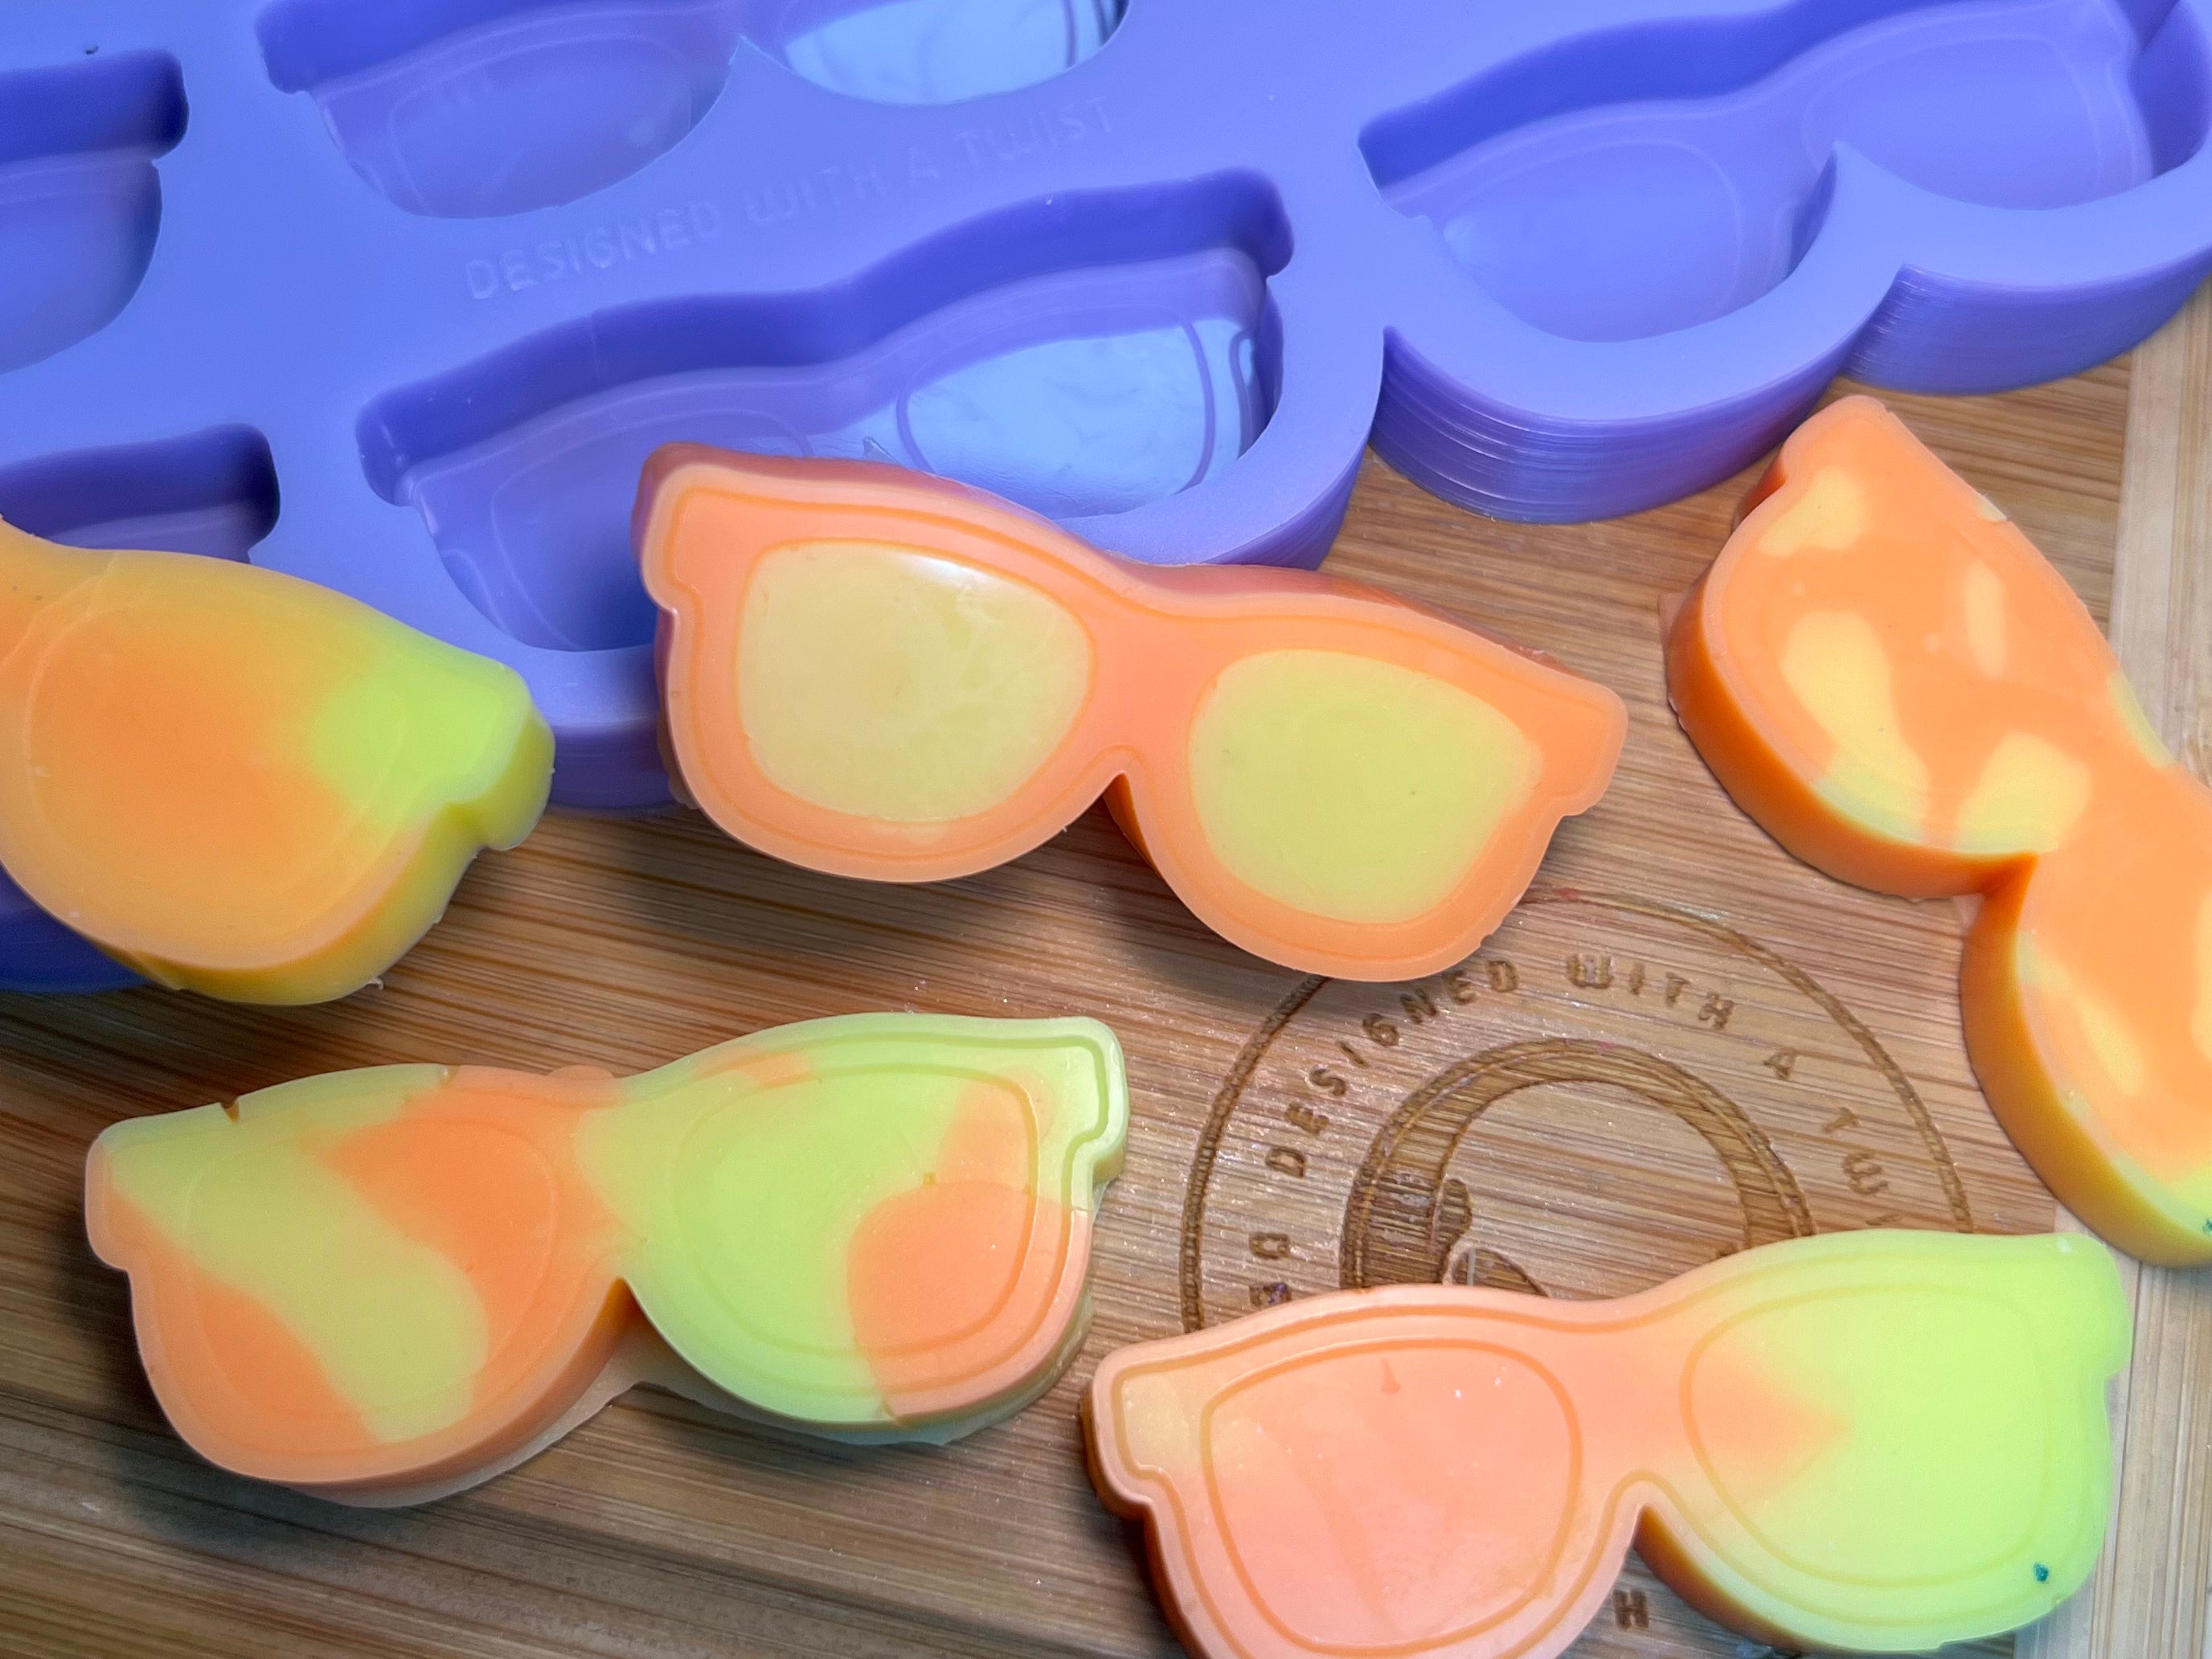 Sunglasses Silicone Mold - Designed with a Twist - Top quality silicone molds made in the UK.